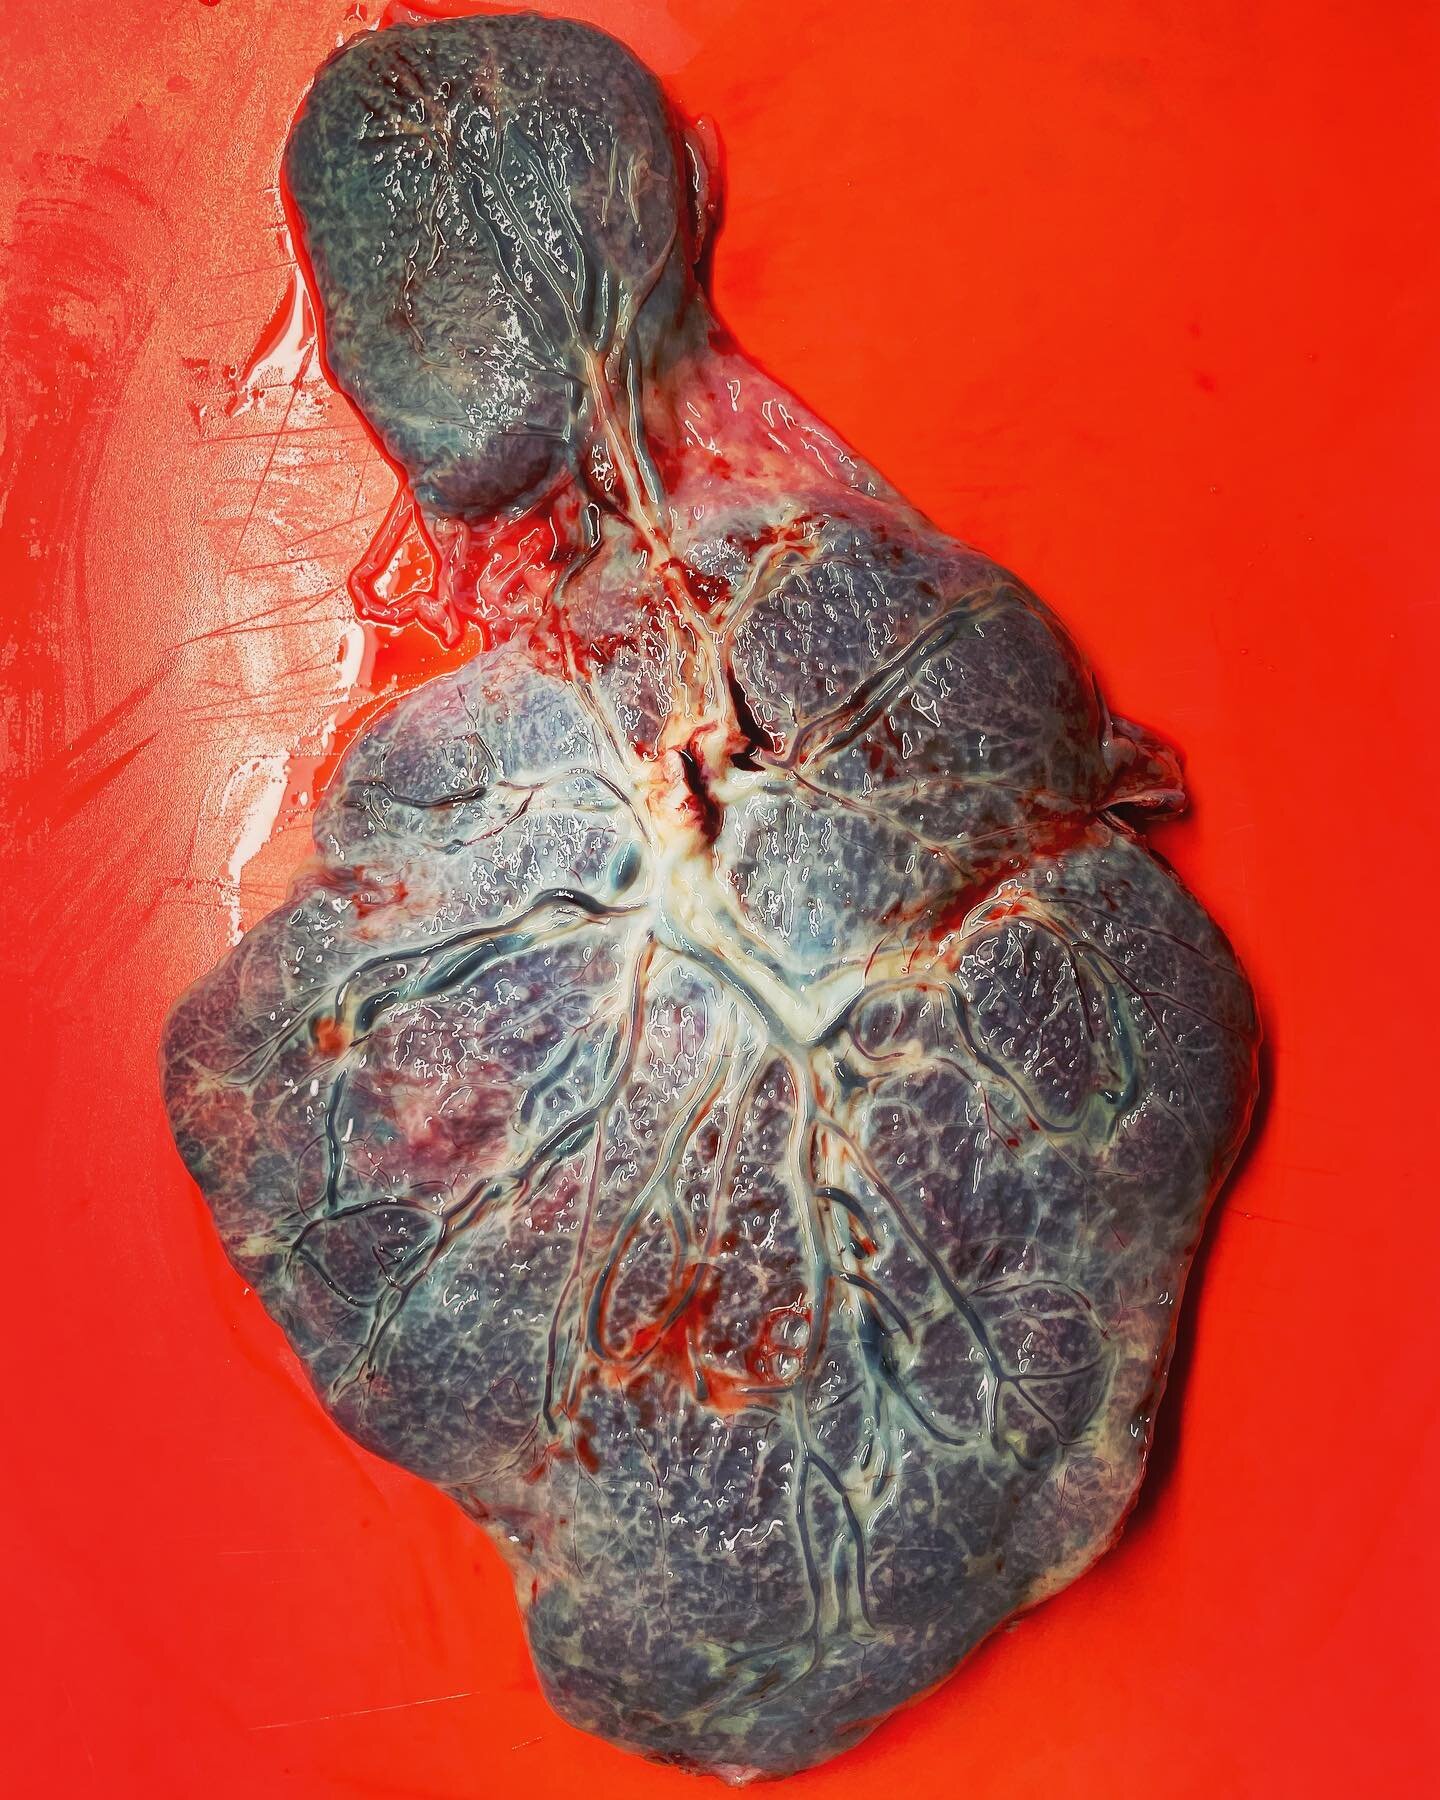 A succenturiate placenta is a variation of placenta morphology. It occurs when one or more accessory lobes develop. It occurs in about 1.7% of pregnancies. You can see that the vessels are only supported by the membranes connecting the two together. 